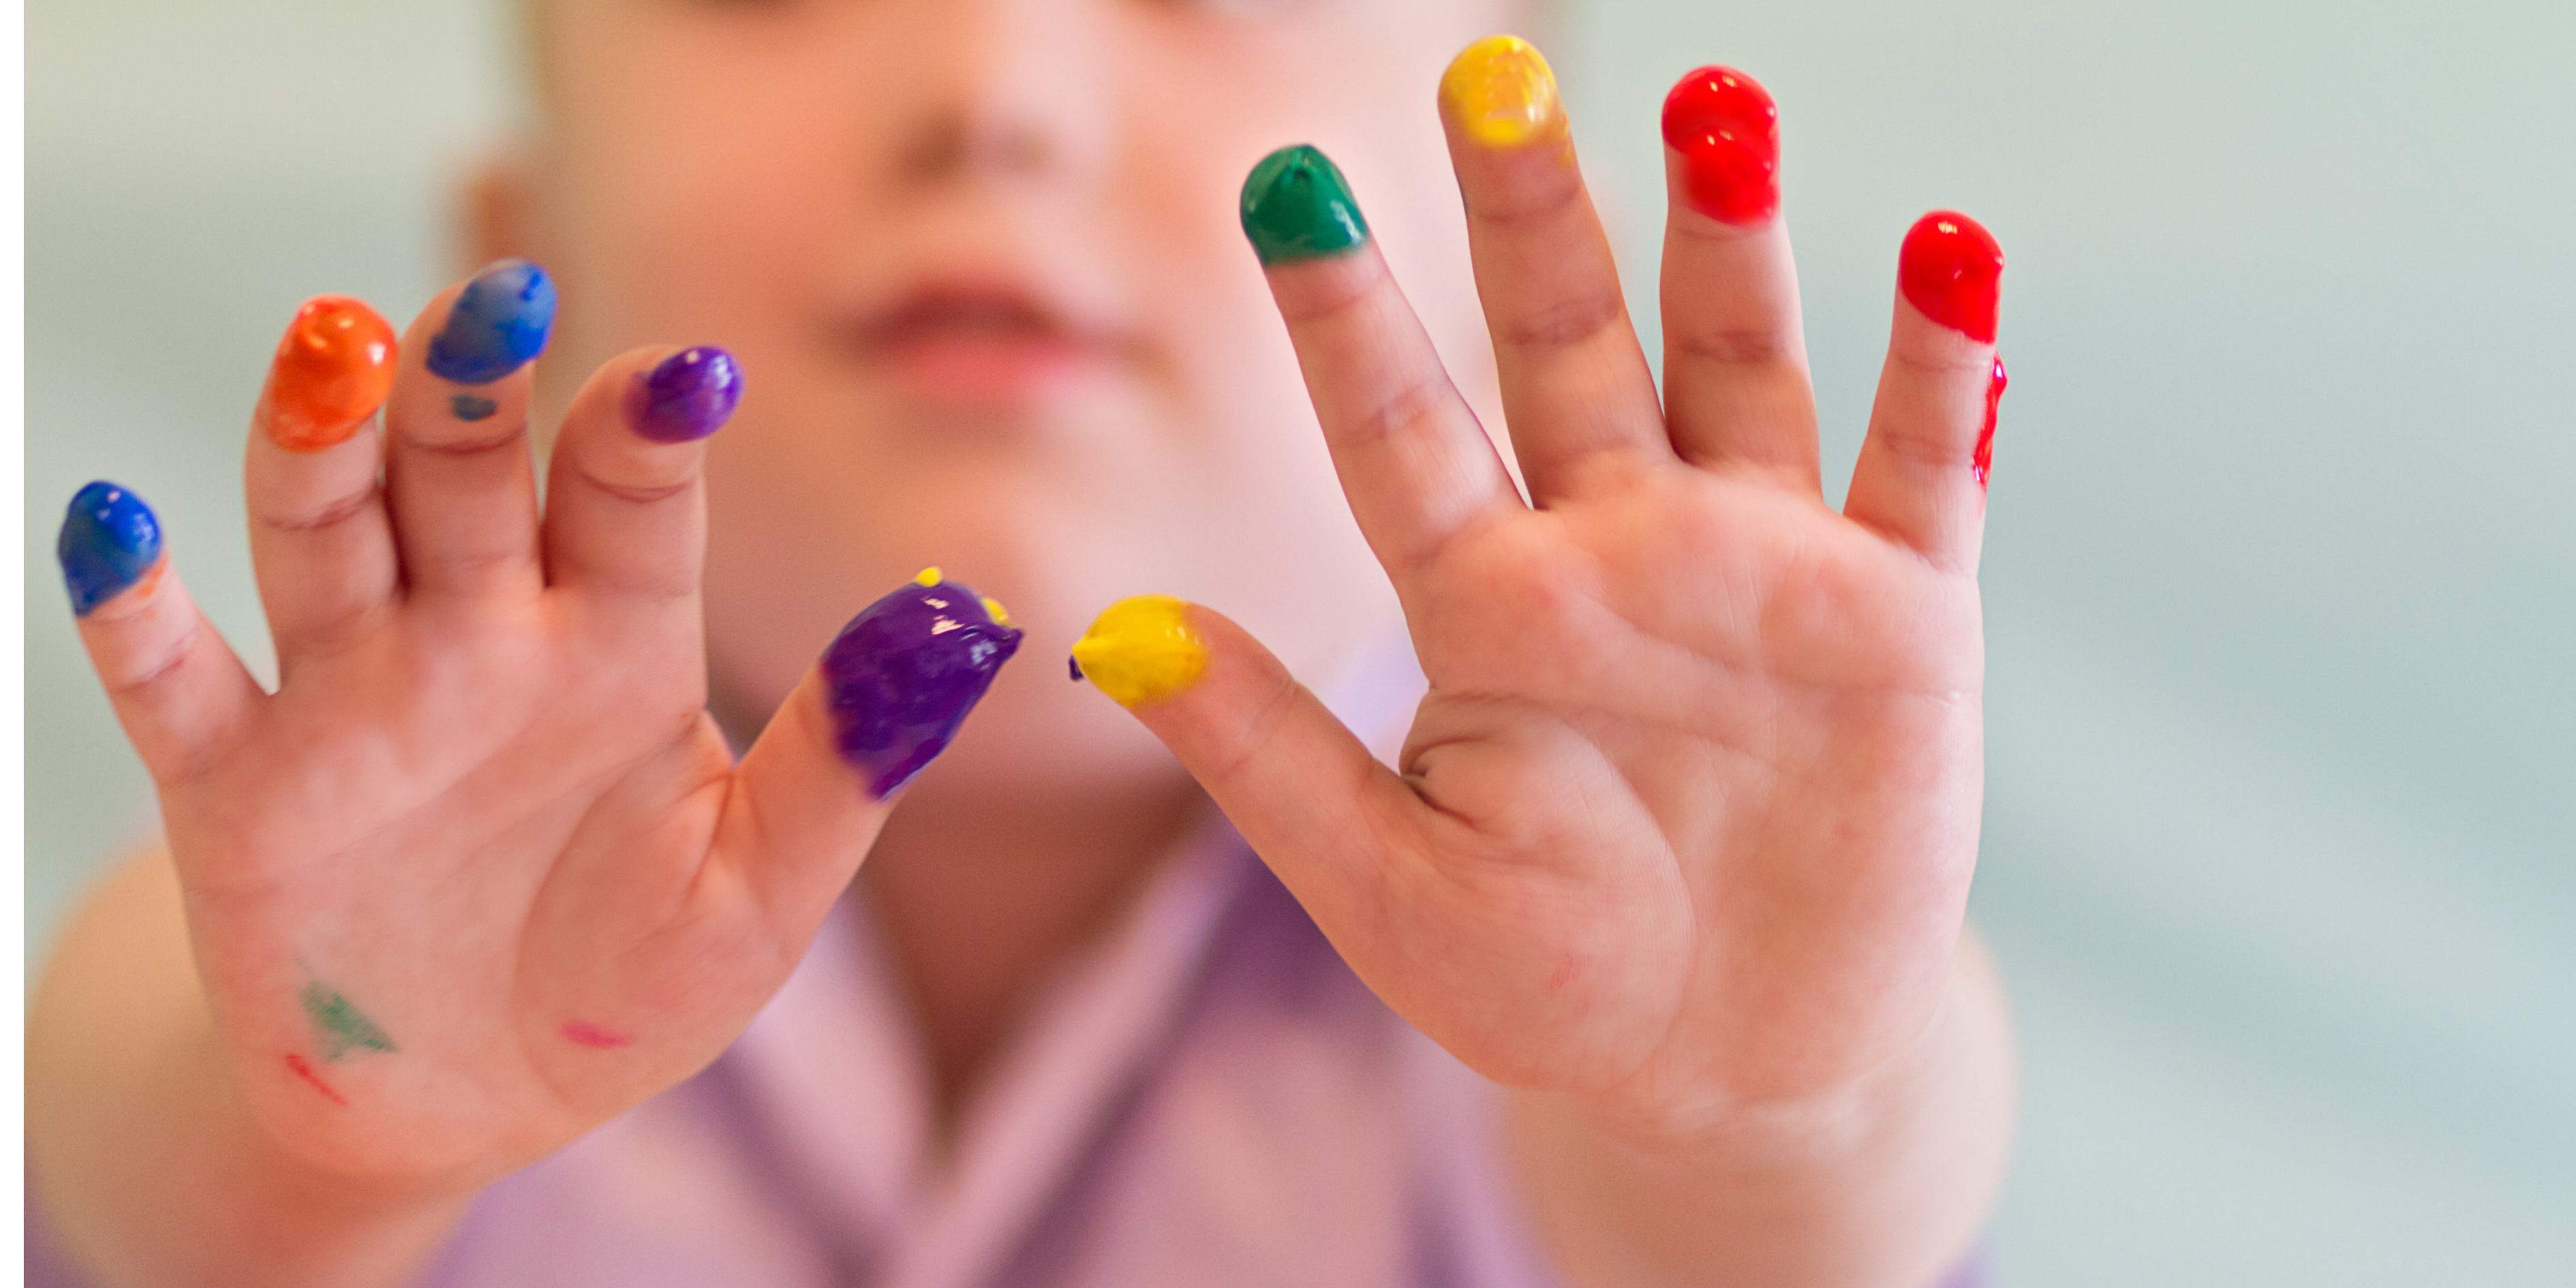 The Ultimate Guide to Kids' Finger Painting Fun